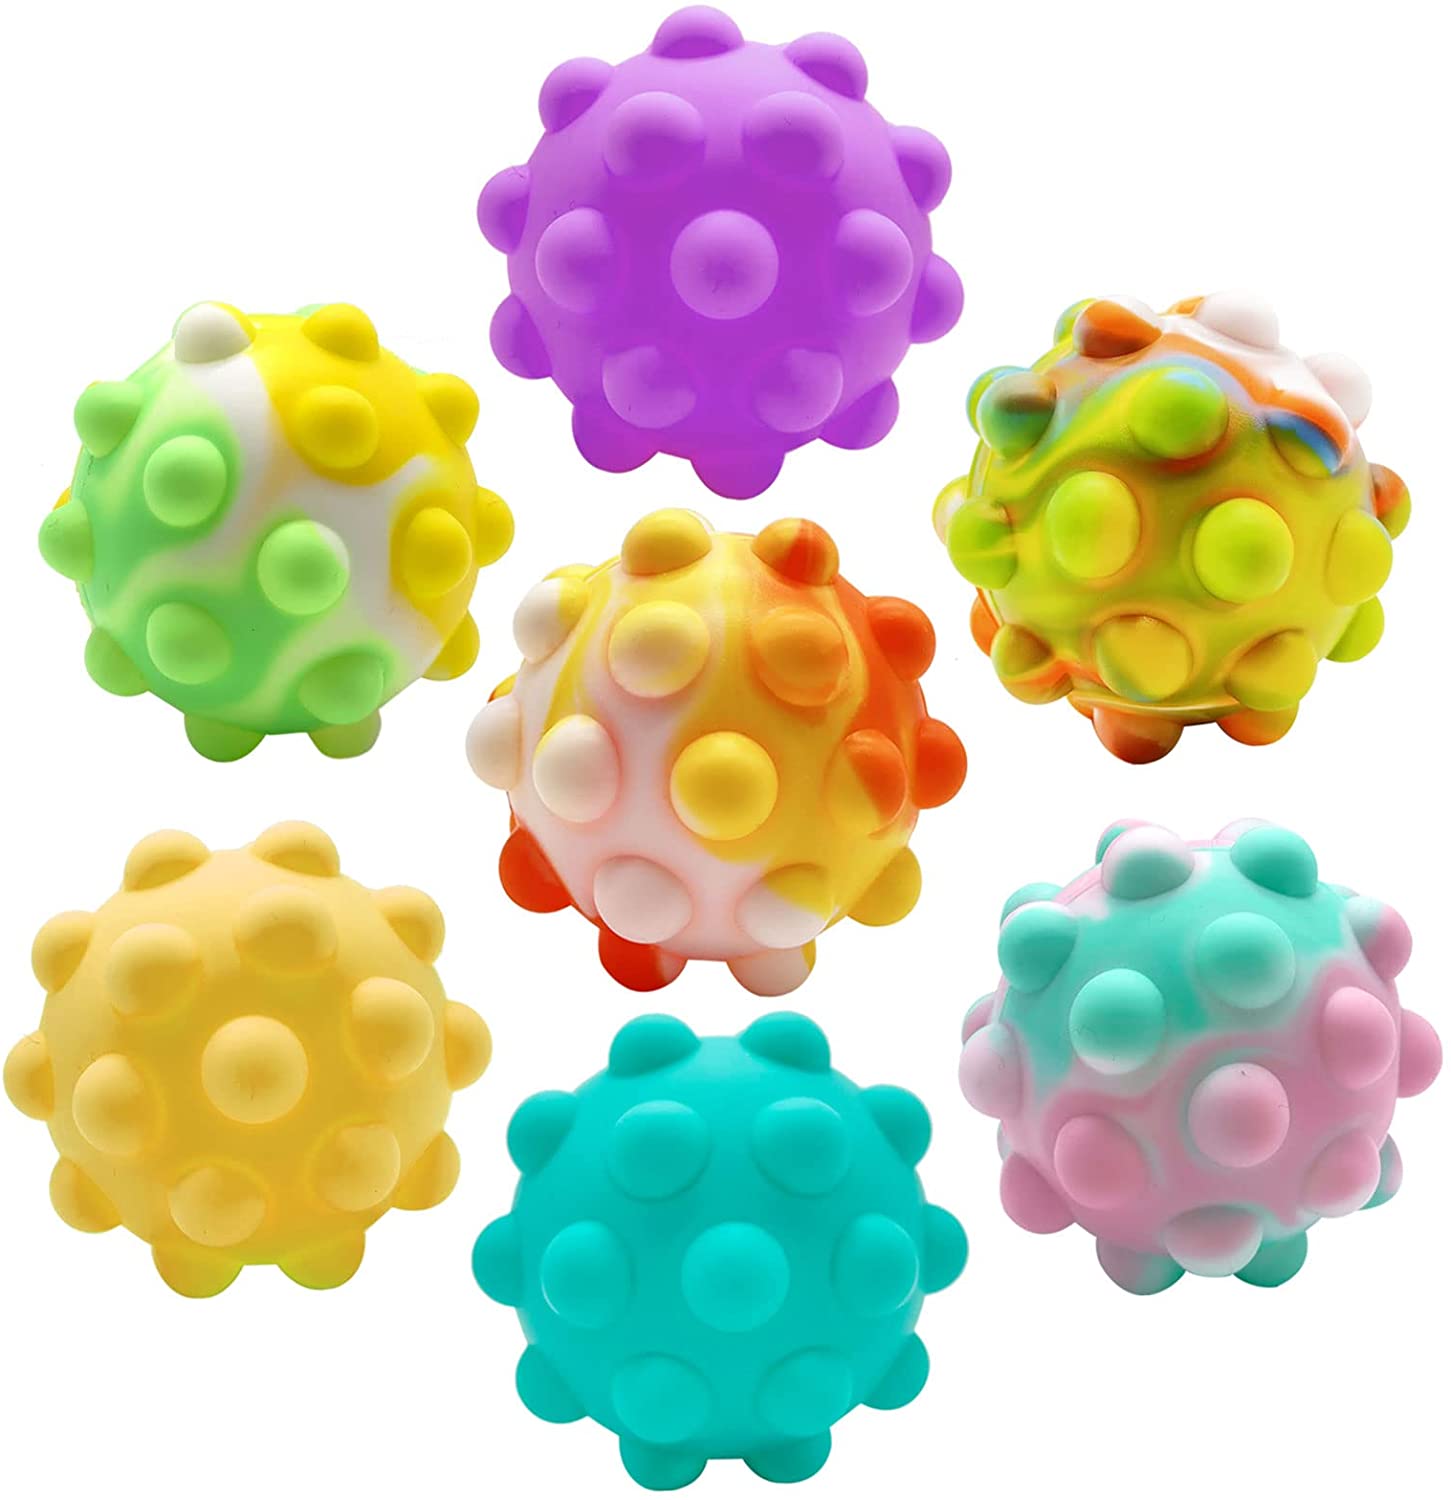 Pop Push Stress Relief 3D Ball Cykapu 7 Pack Stress Ball Pop Fidget Toy 3D Silicone Squeeze Sensory Bubbles Balls Autism ADHD Adult and Child Pressure Decompression Toys Set Best Christmas Gift Set